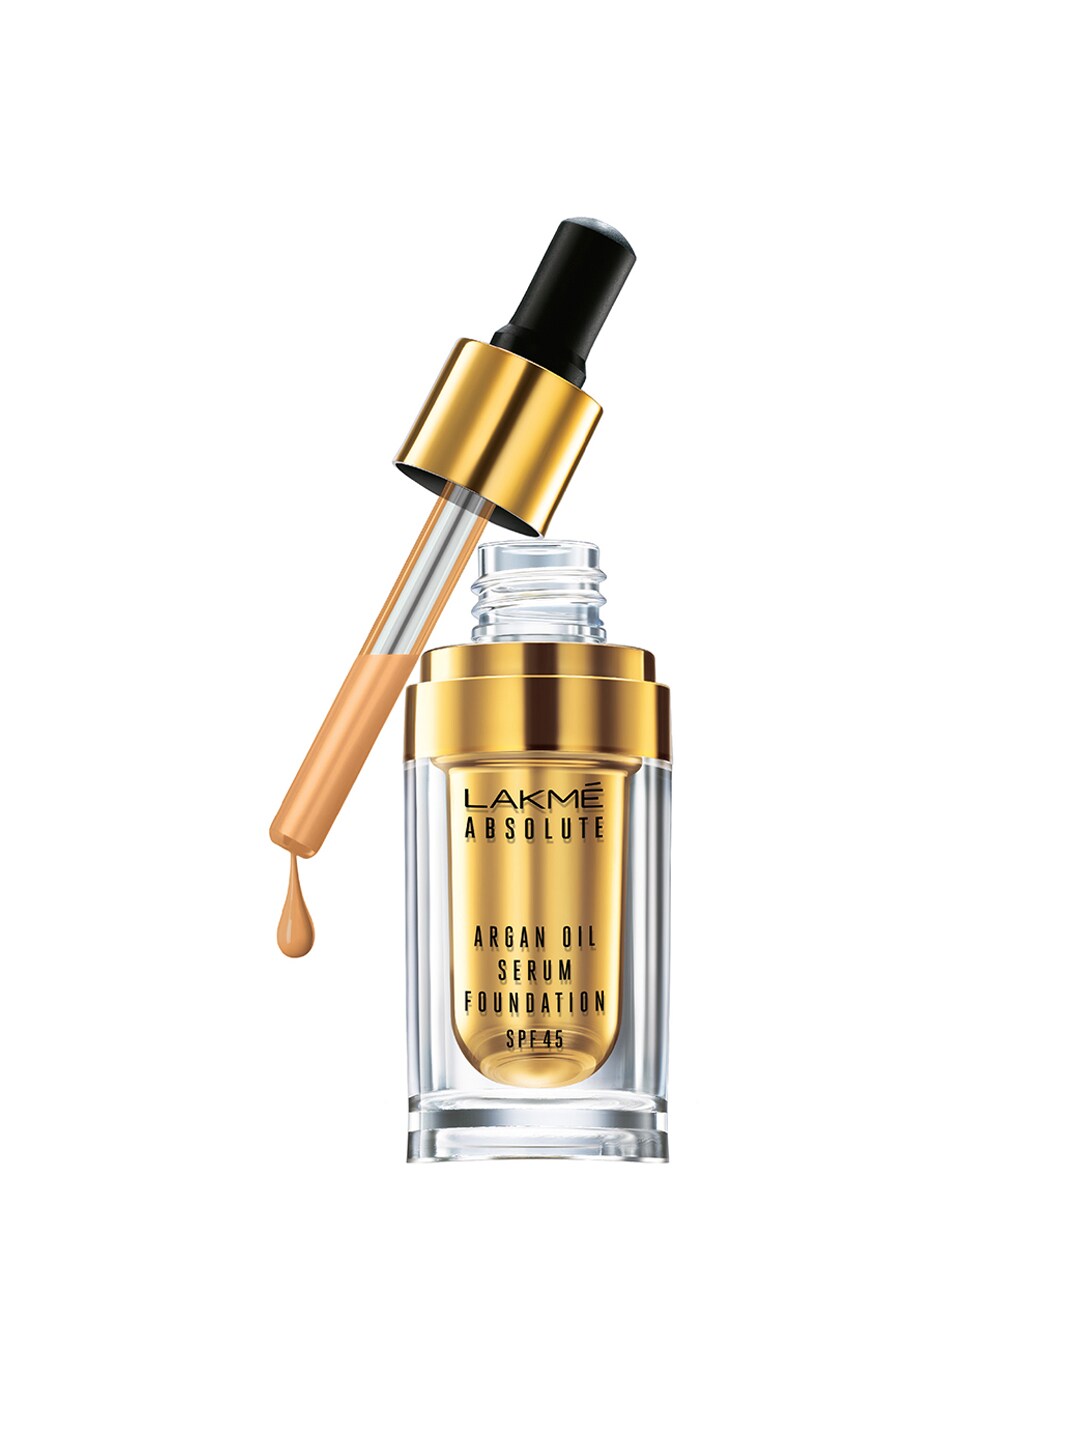 Lakme Absolute Argan Oil Serum Foundation with SPF 45 - Ivory Cream Price in India